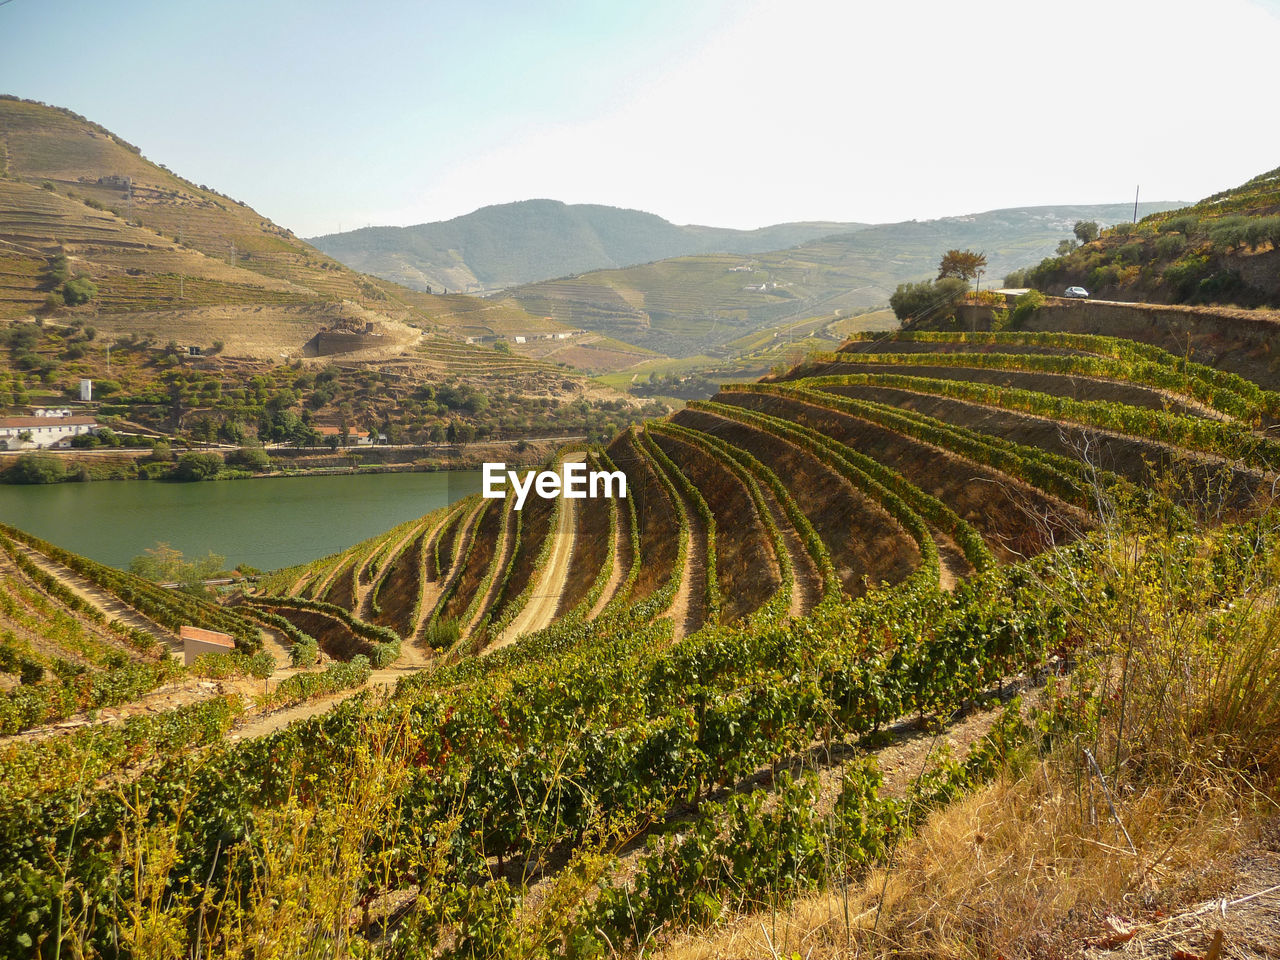 Douro valey in portugal with winery and vineyards landscape. travel and tourism